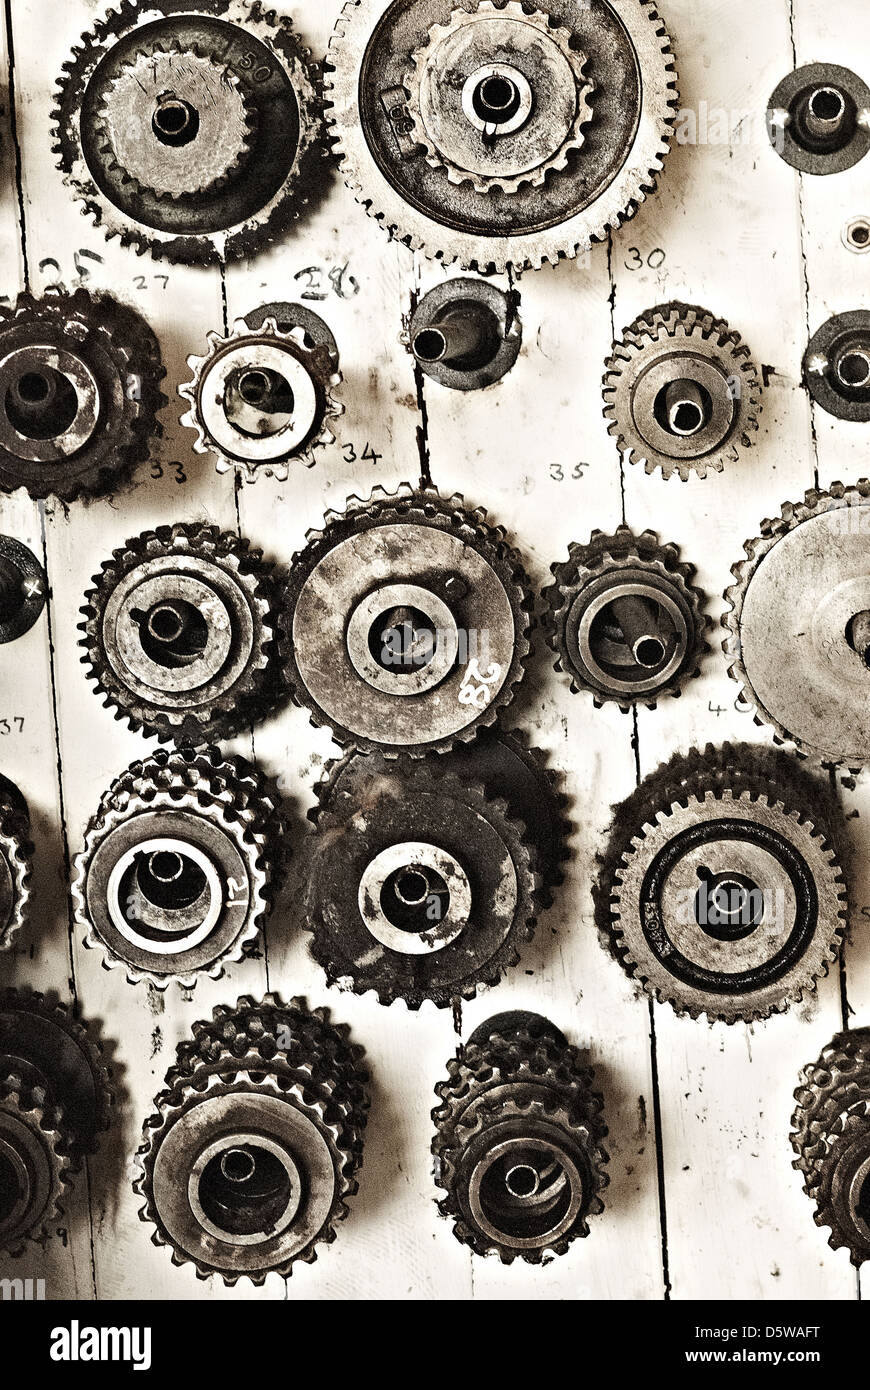 A wall of gears and cogs from a Yorkshire Mill Stock Photo